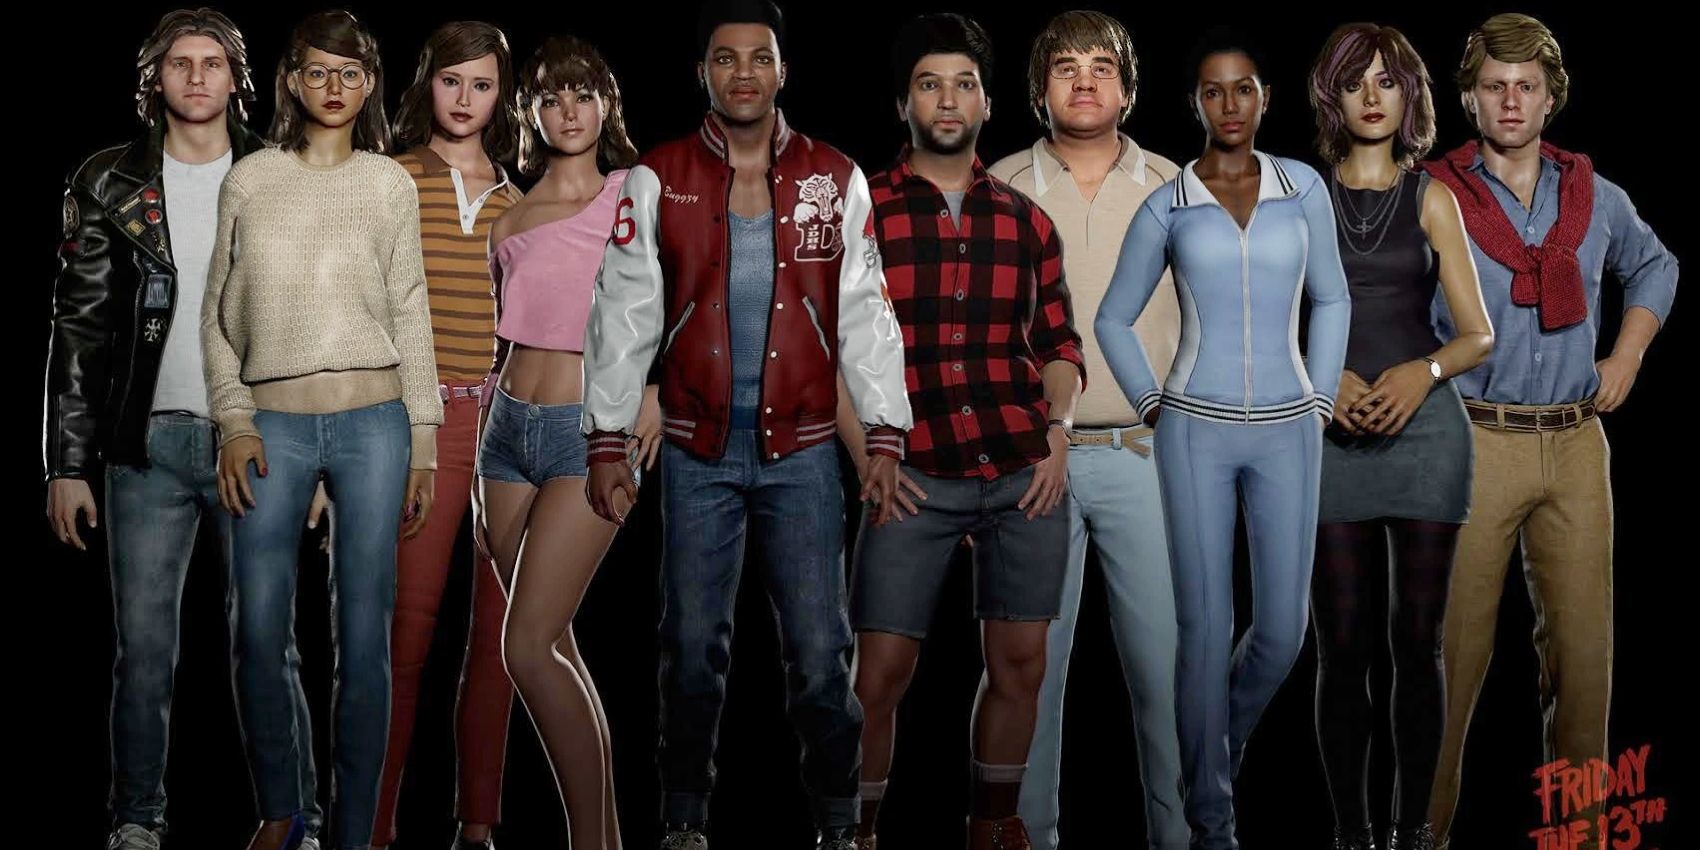 Group shot of the 10 main counselors in Friday the 13th: The Game.